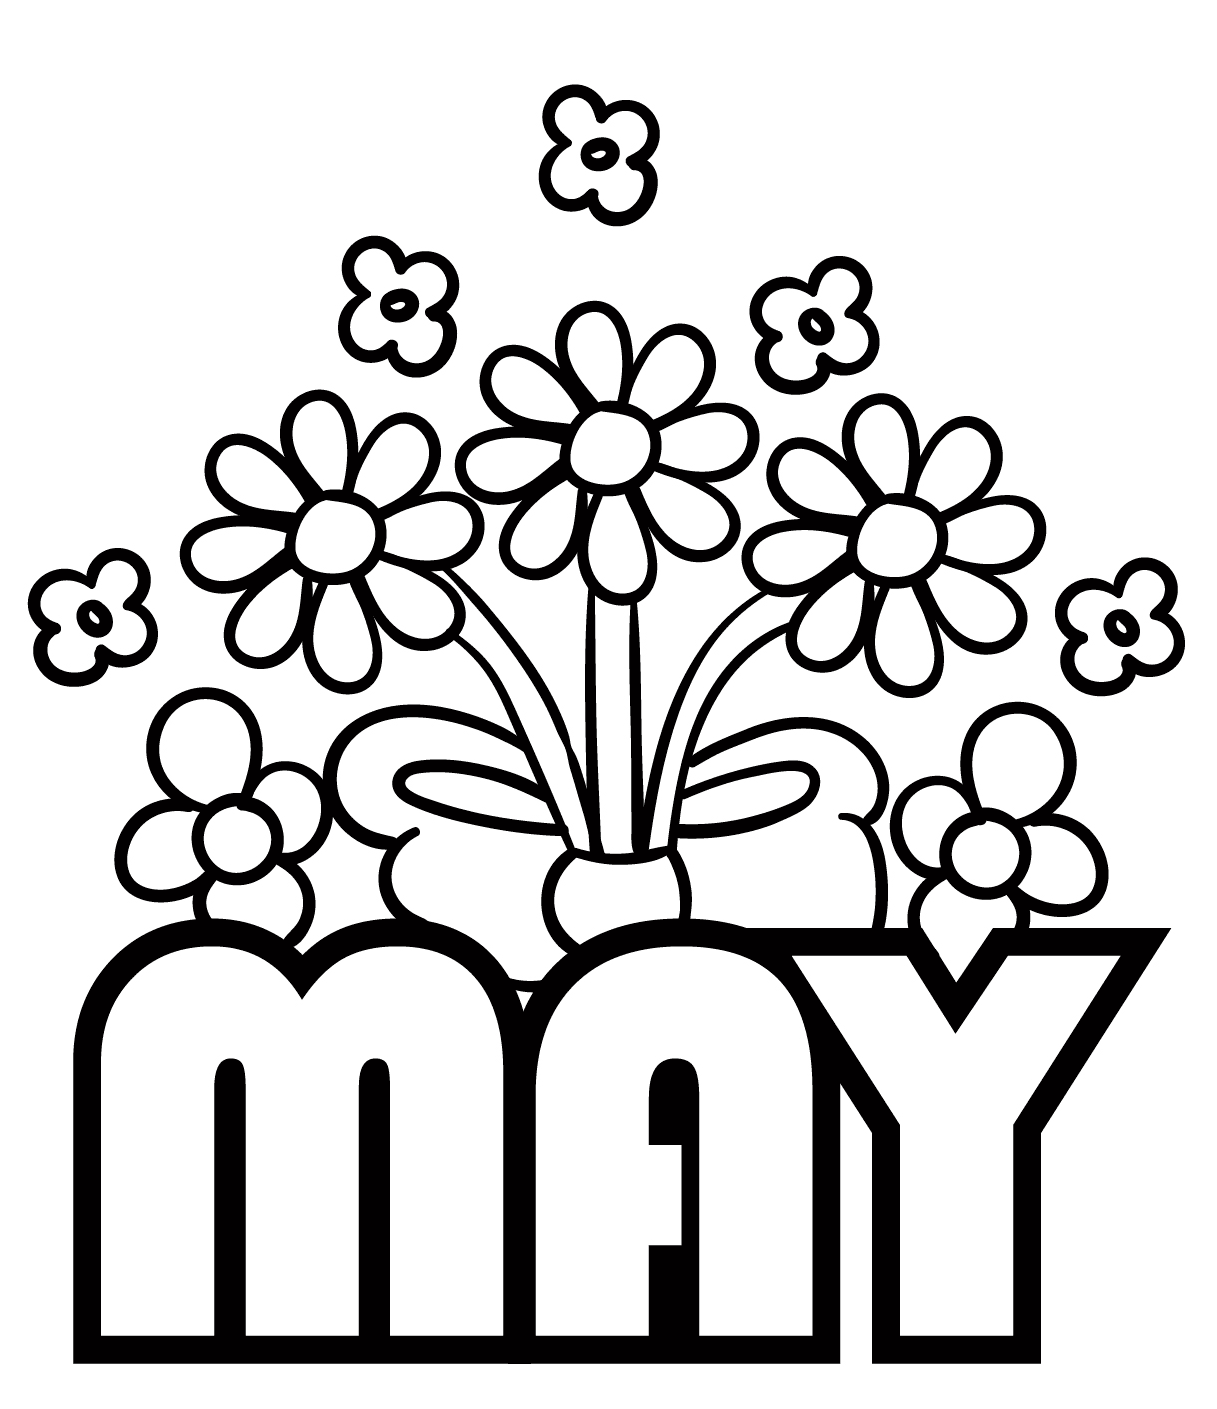 May for Children Coloring Pages